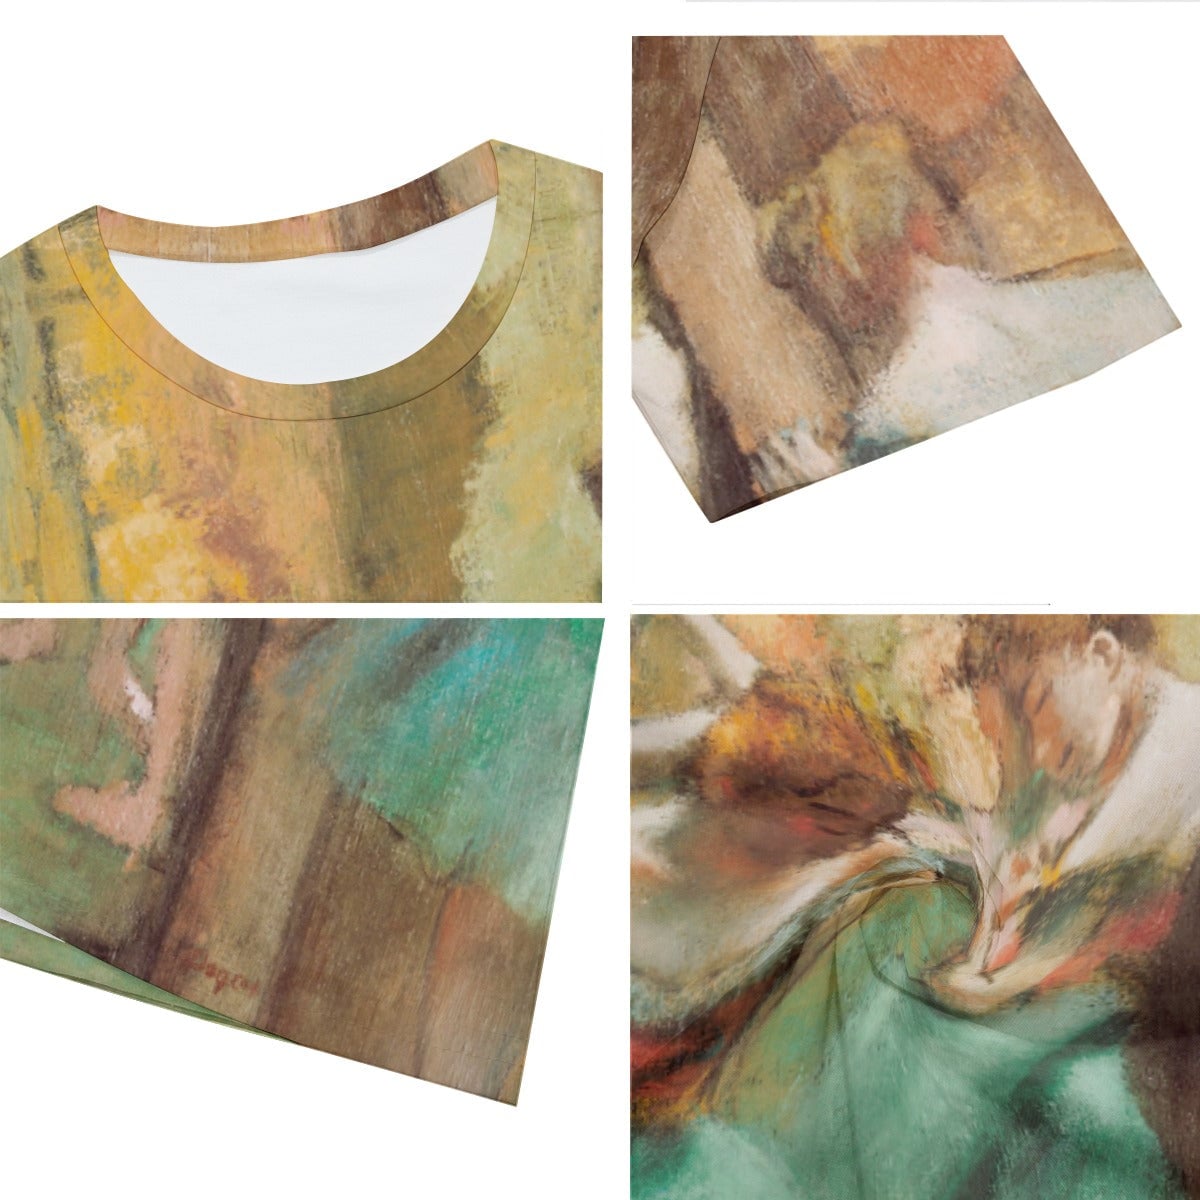 Dancers Pink and Green by Edgar Degas T-Shirt